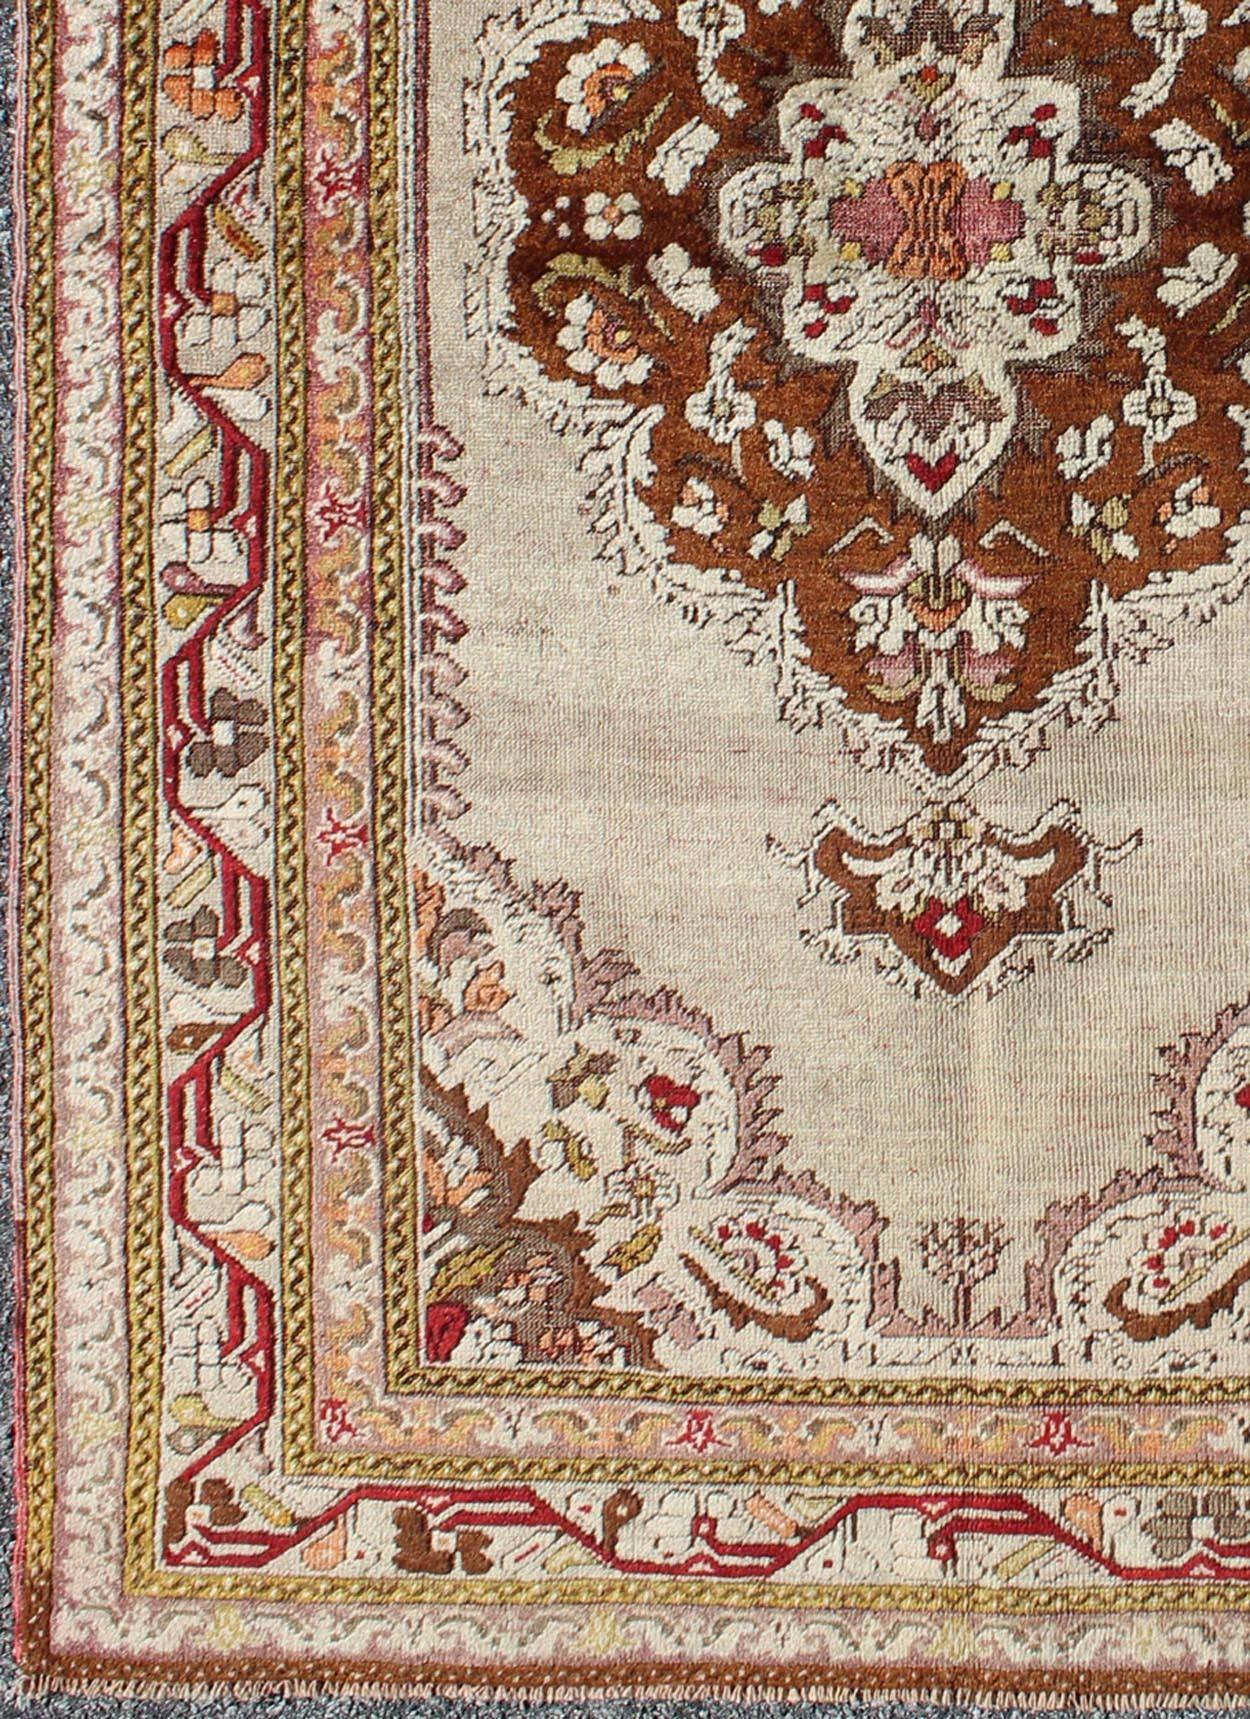 Antique Turkish Oushak with Brown Medallion and Taupe Background in Matti shades of green, and Red Accents, Rug TU-EMD-95032, country of origin / type: Turkey / Oushak, circa early-20th Century.
Measures: 4'2 x 6'9.
Antique Oushak Rugs are